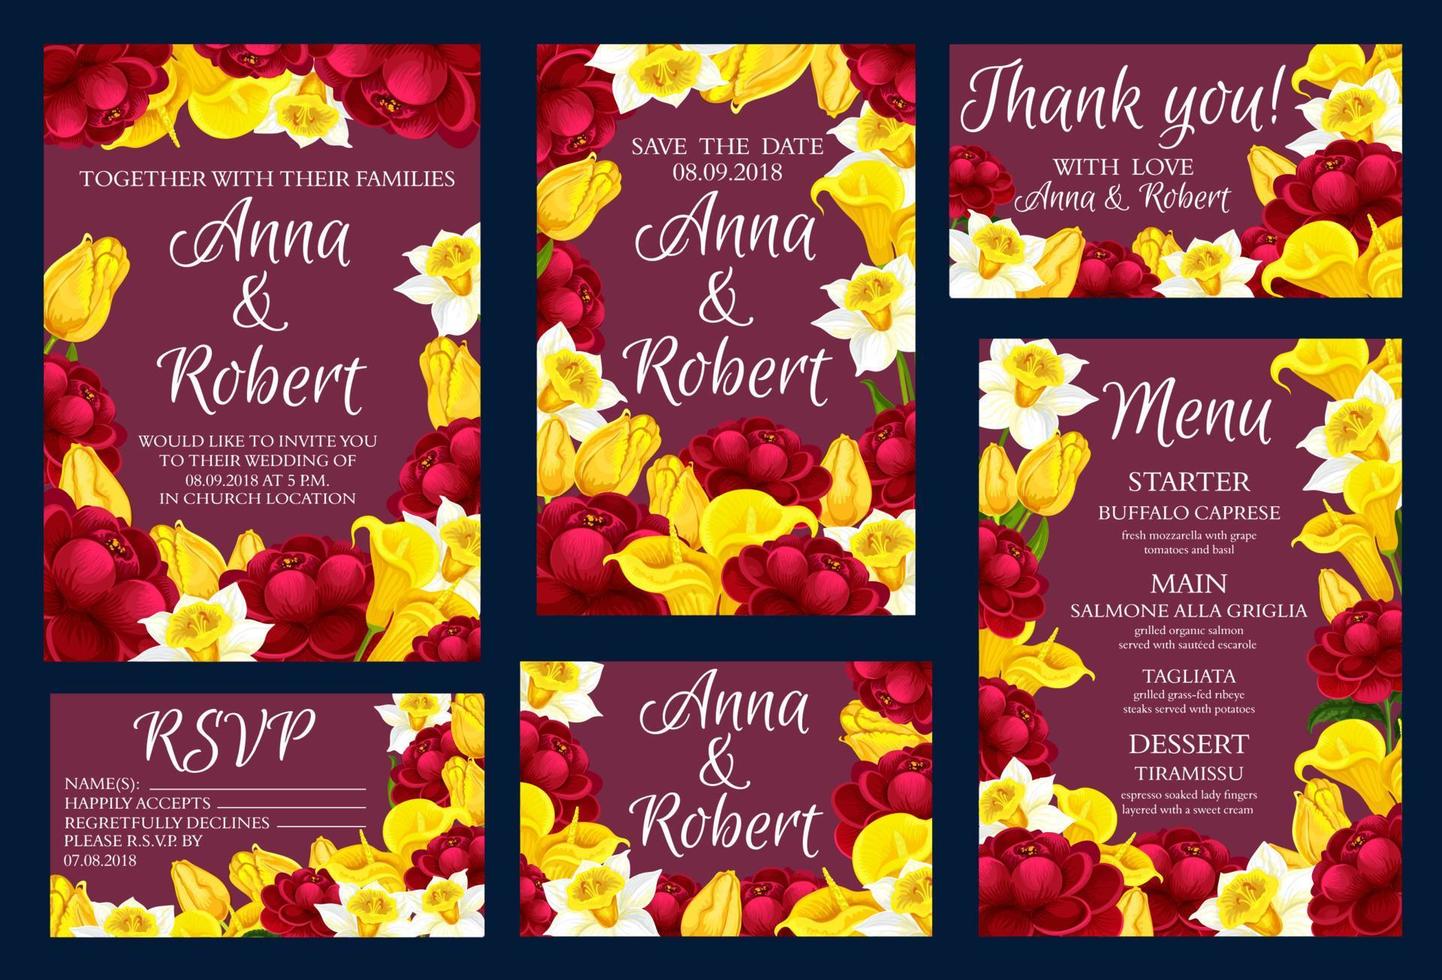 Wedding engagement invitation cards with flowers vector